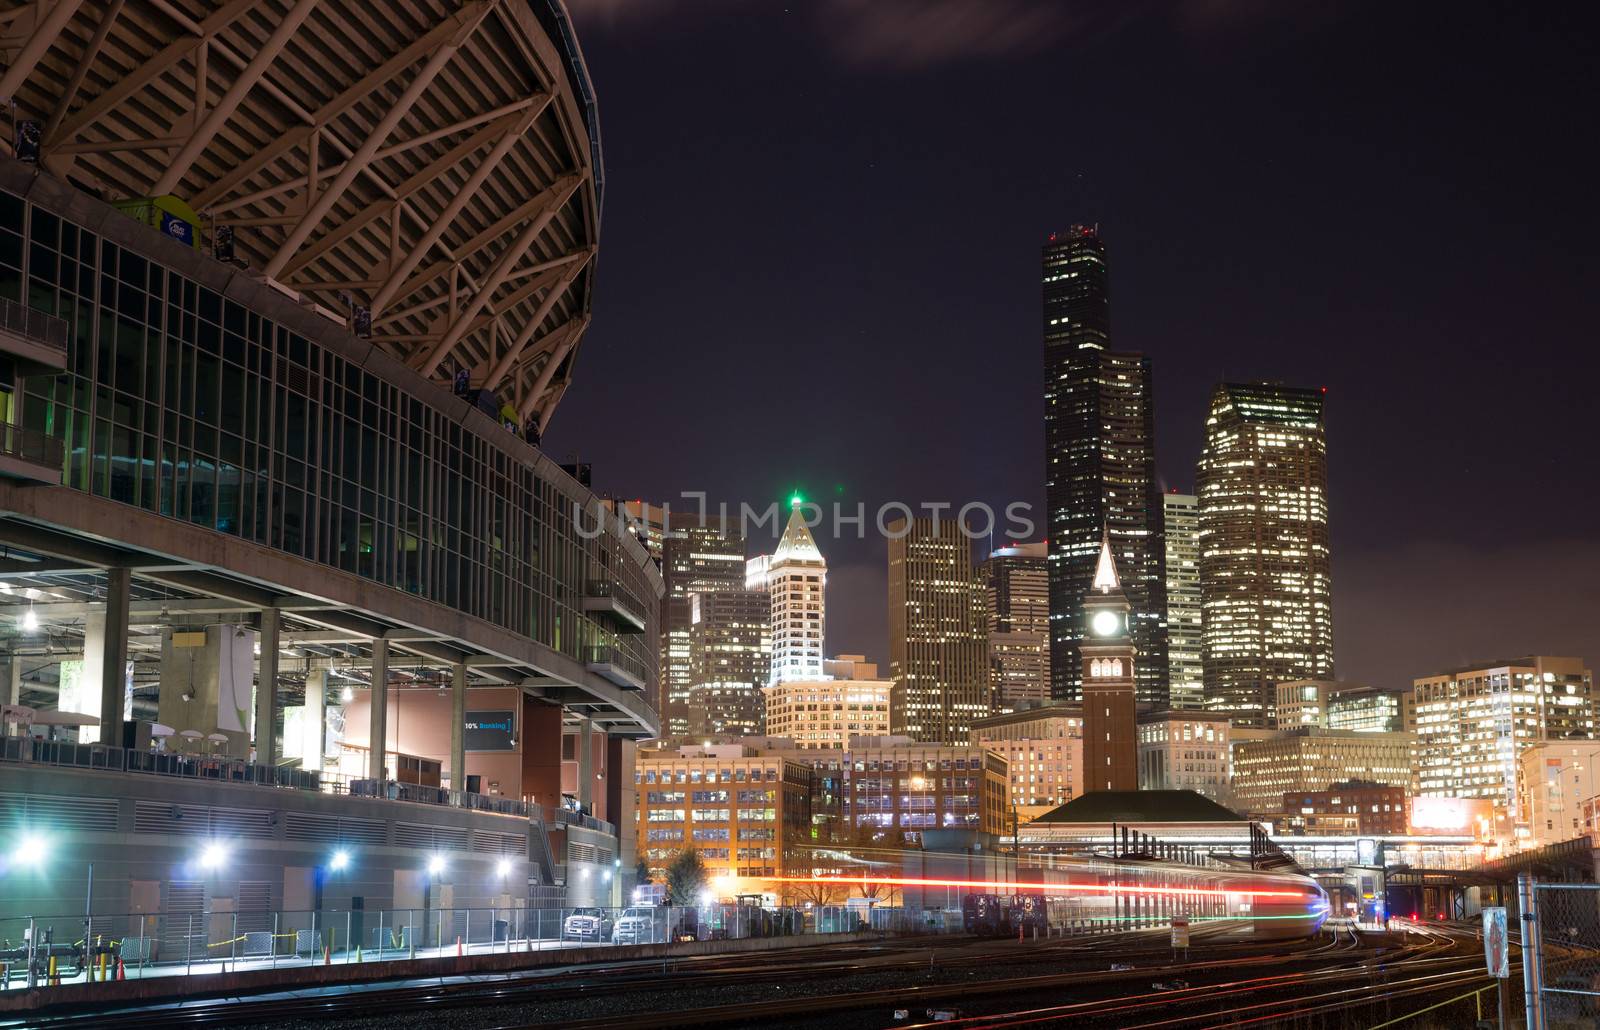 Union Station Downtown Urban Transportation Stadium Building by ChrisBoswell